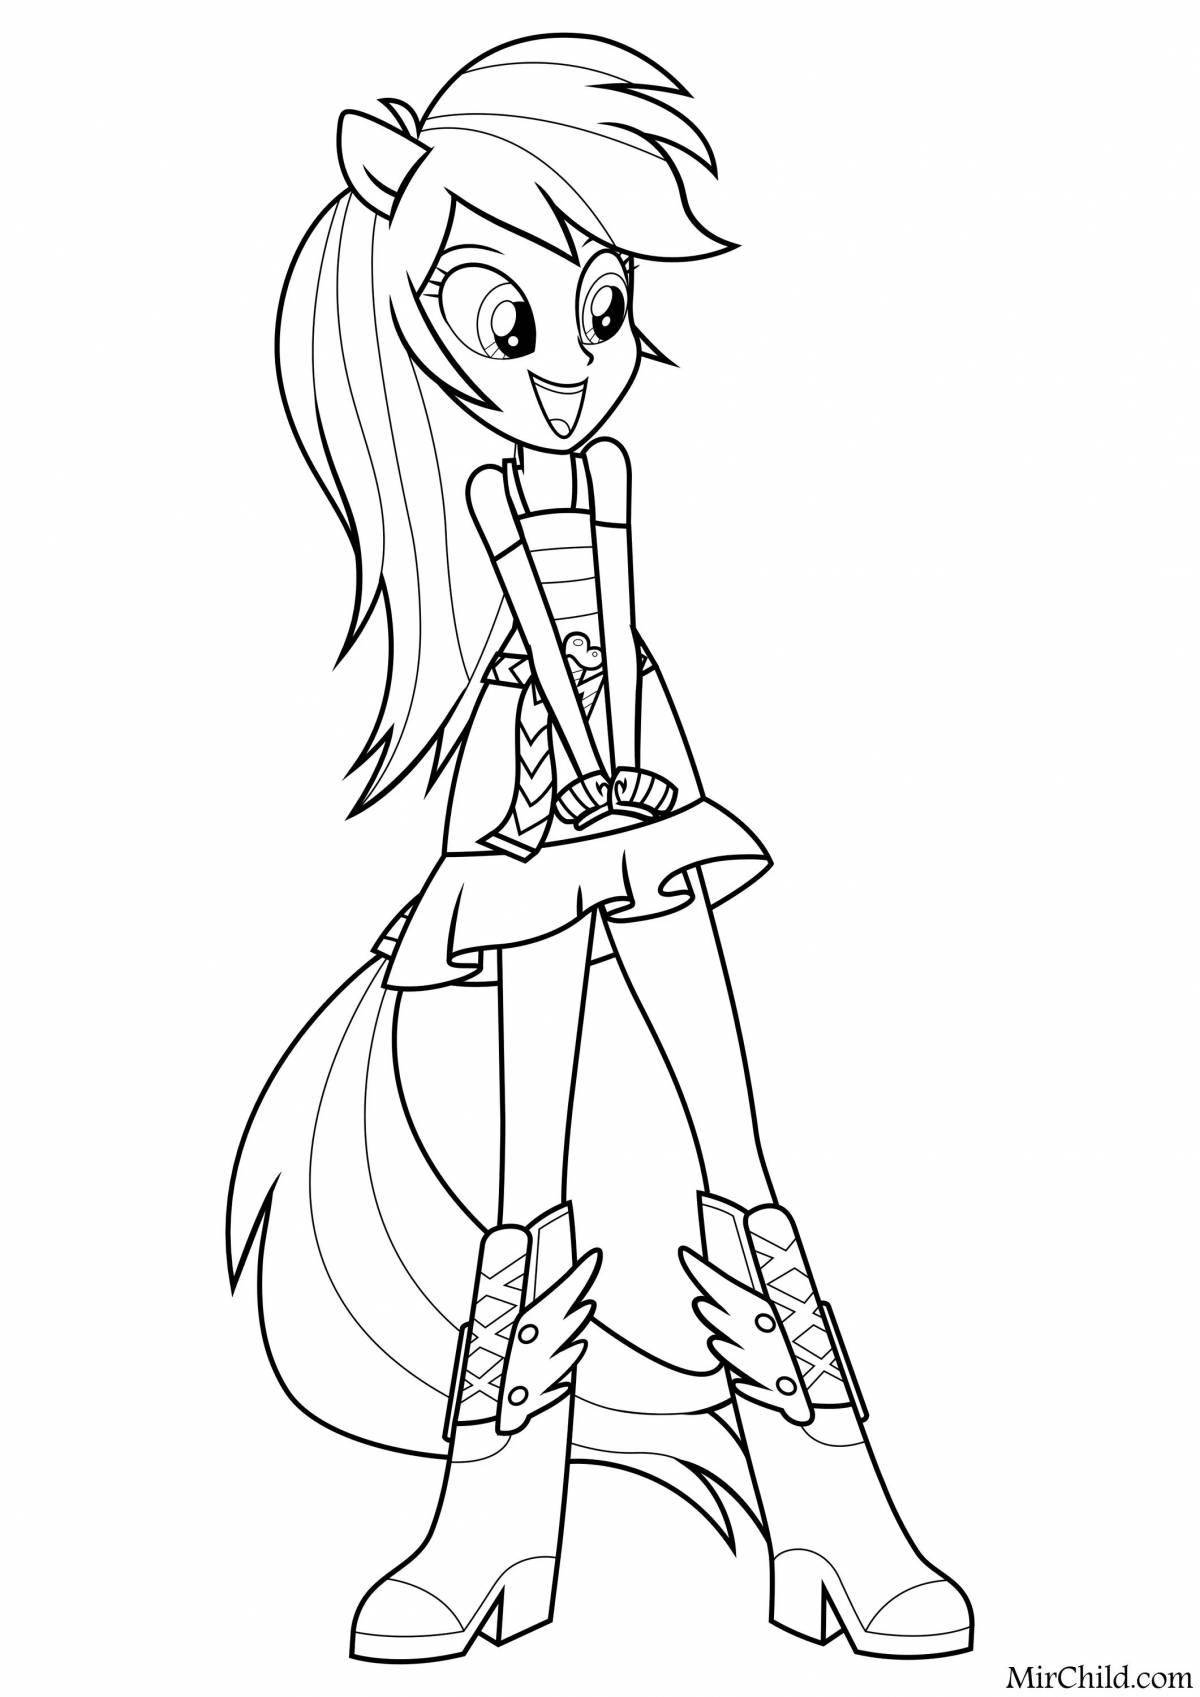 Gorgeous equestria girls coloring page